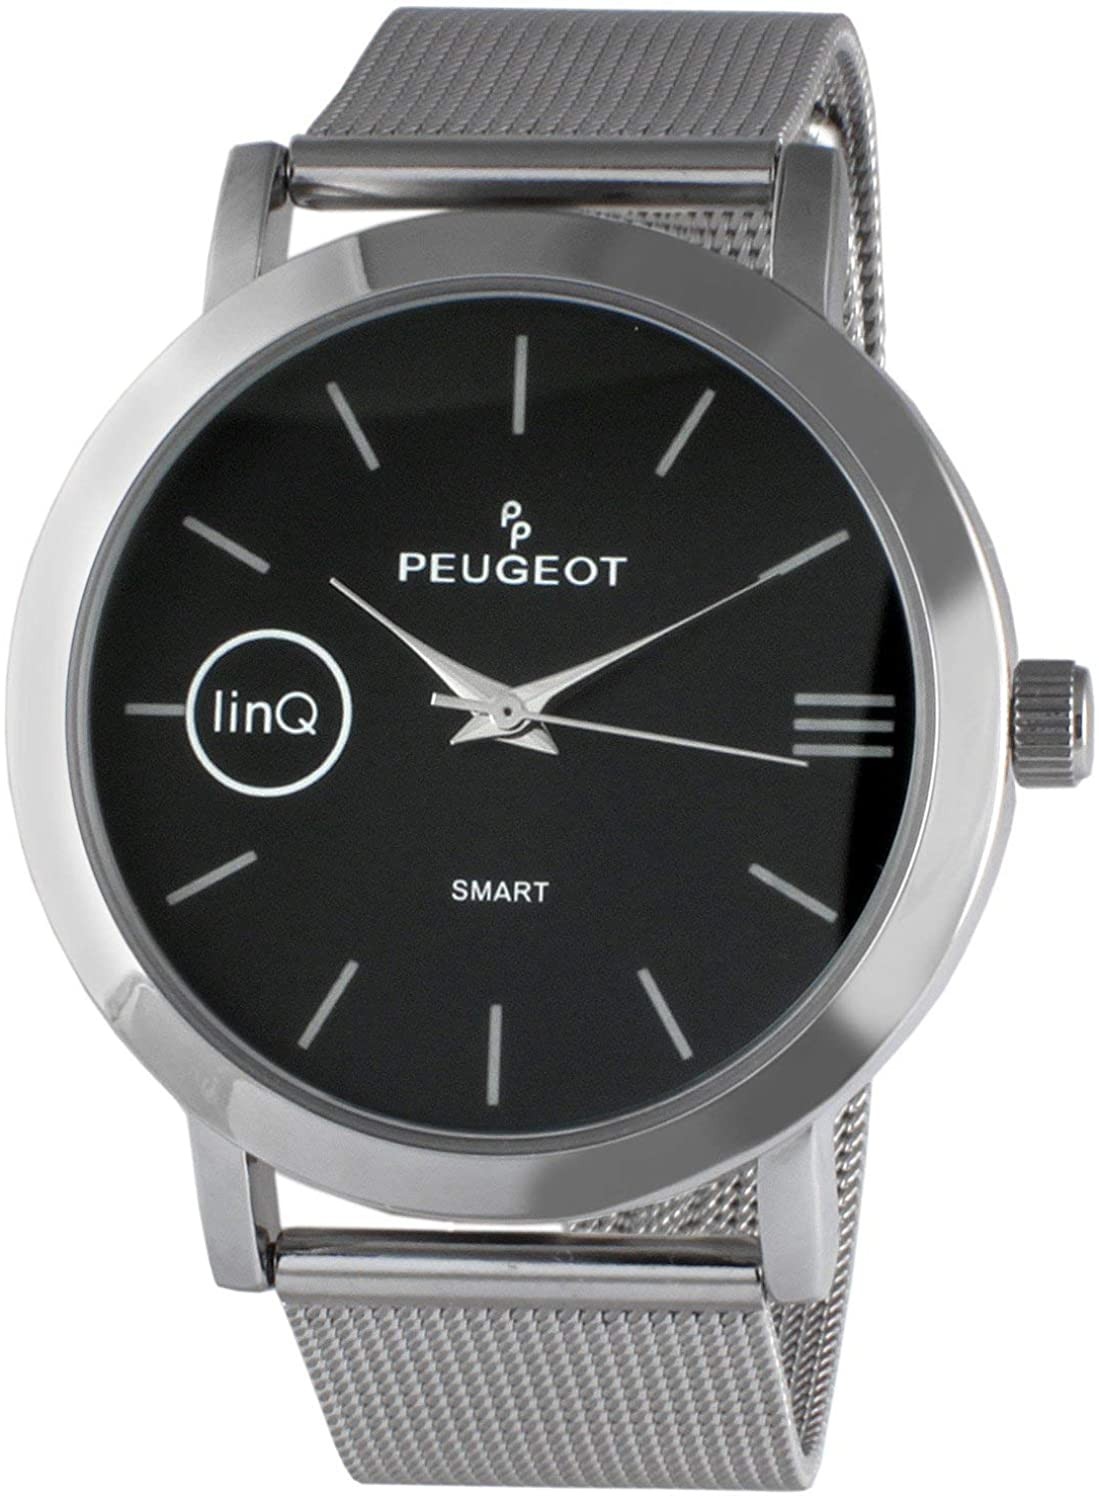 Peugeot LinQ Bluetooth Hybrid Analog Smartwatch Compatible with iOS and Android Phones Minimalist